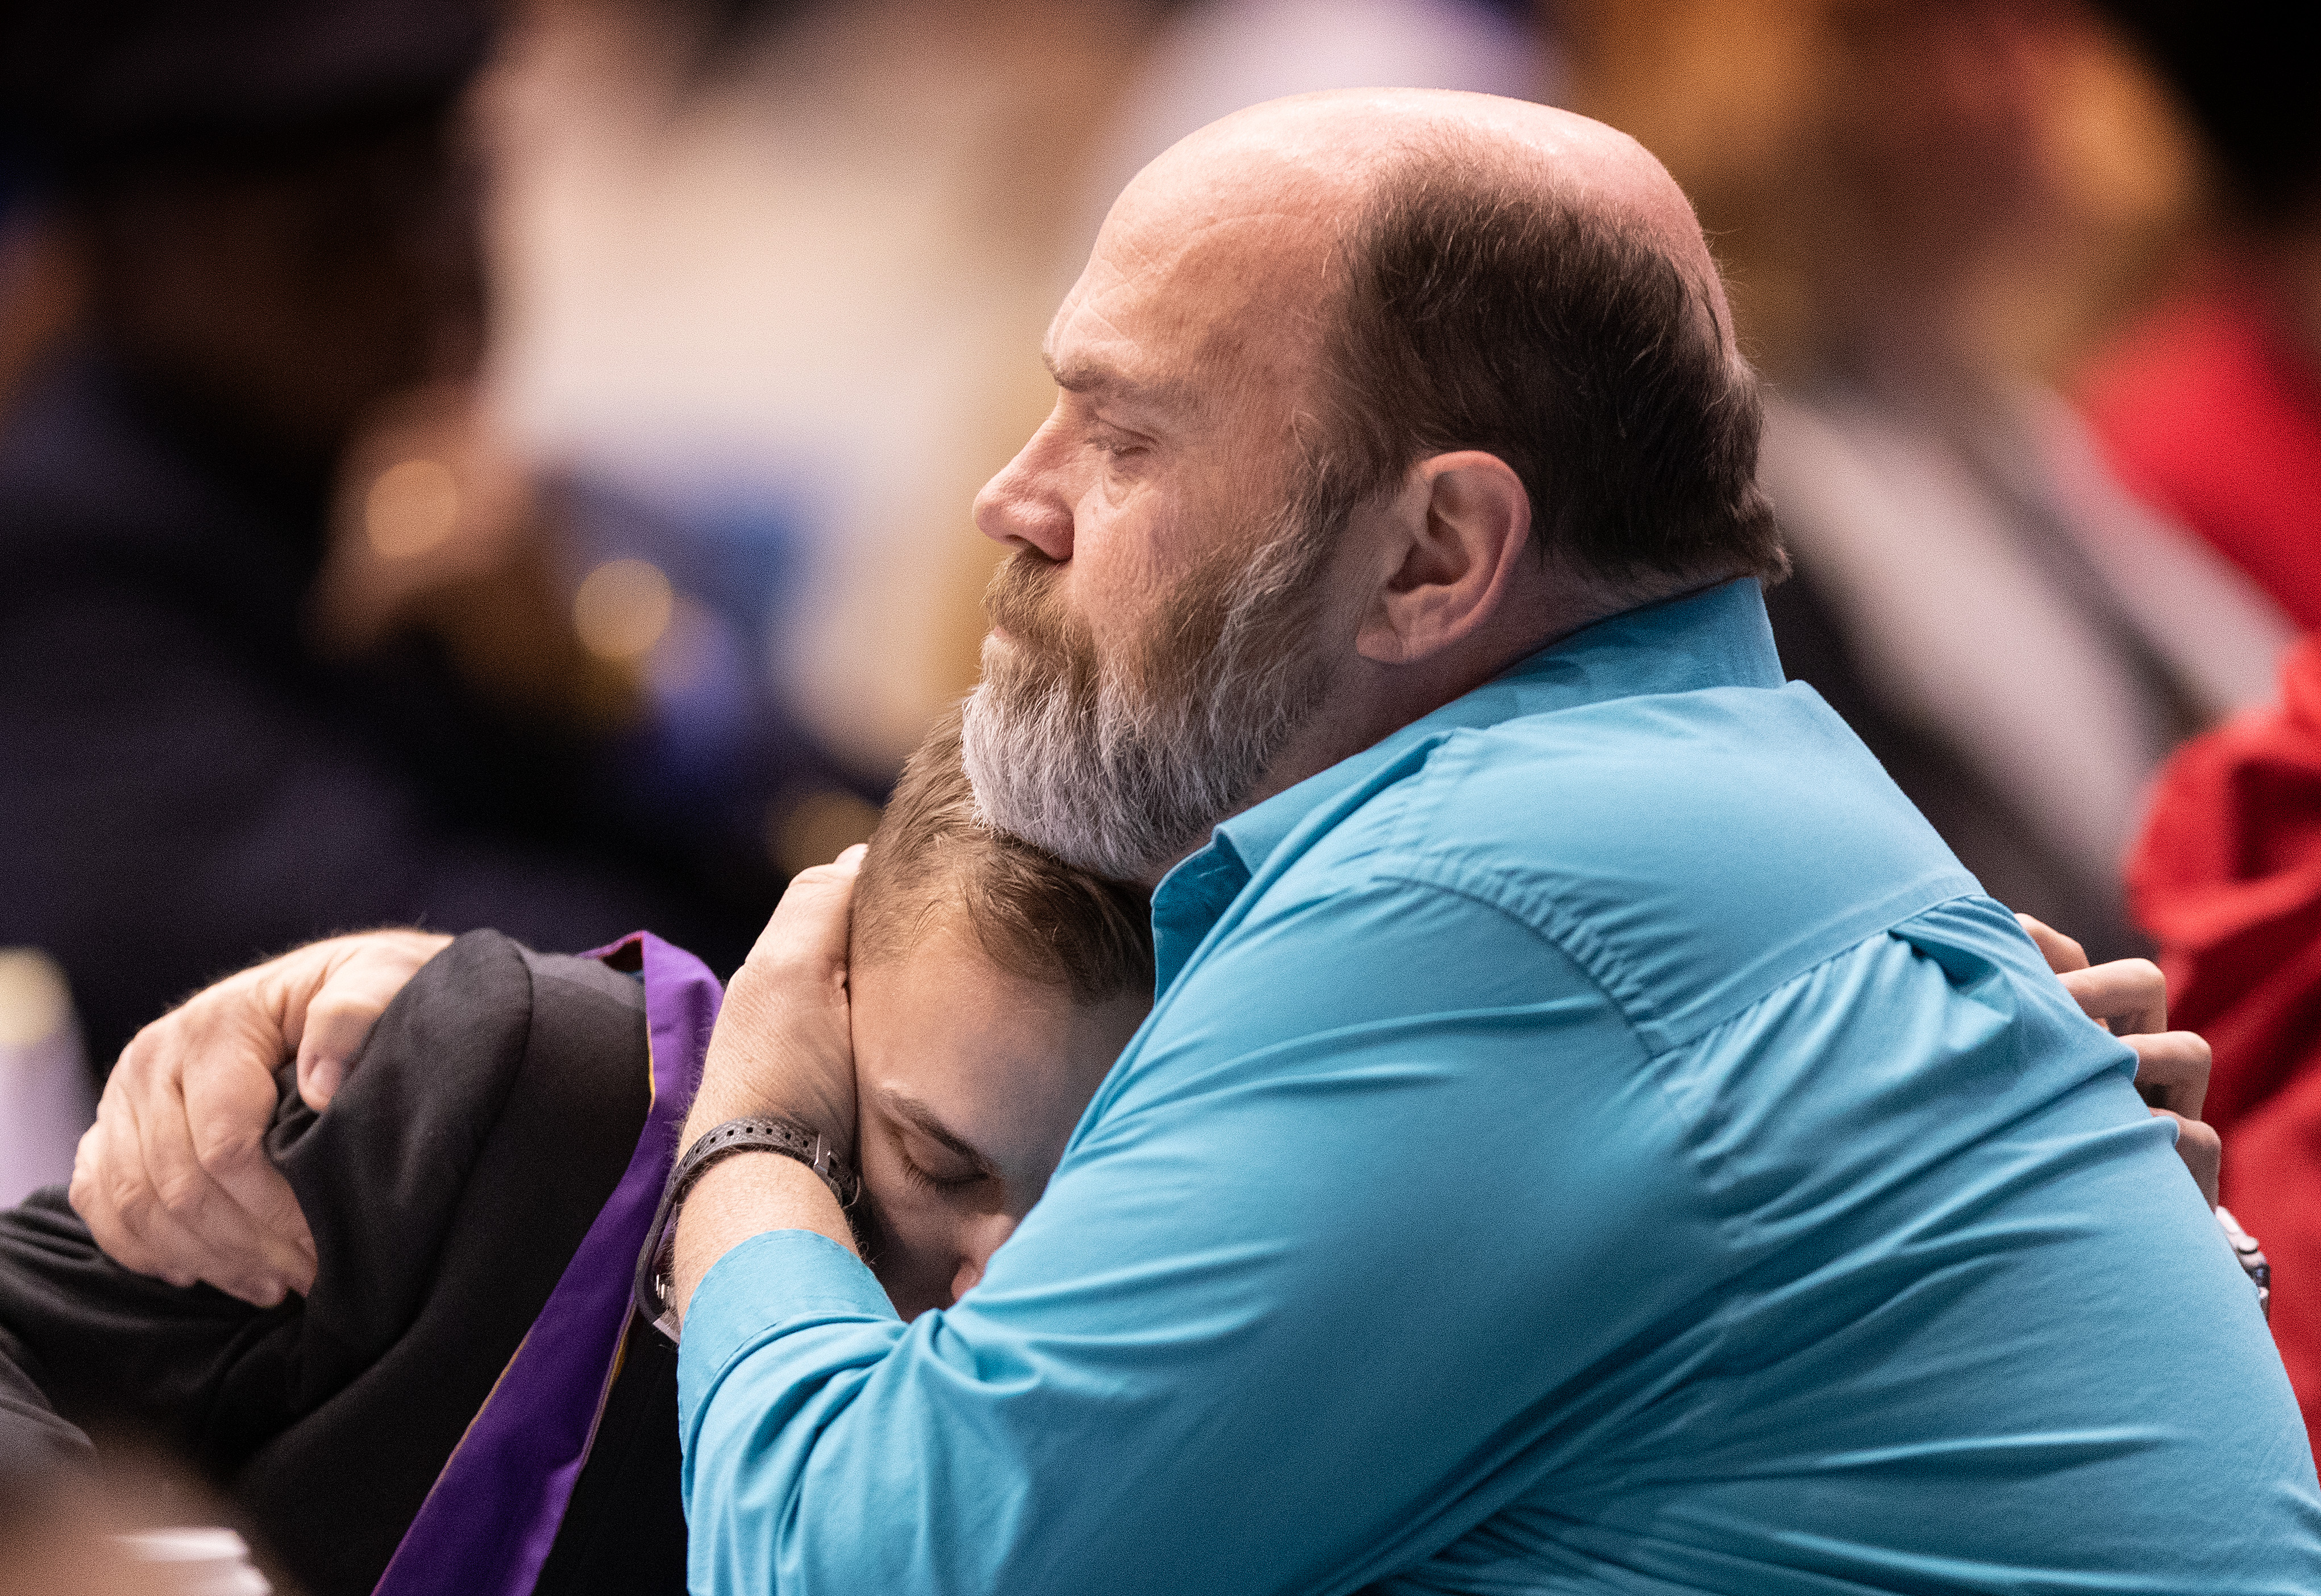 The Rev. Bill Mudge (right) comforts fellow delegate Jeffrey J.J Warren of the Upper New York Conference after Warren spoke in favor of full inclusion for LGBTQ persons in the life of The United Methodist Church during the 2019 United Methodist General Conference Feb. 25 in St. Louis. Photo by Mike DuBose, UMNS.